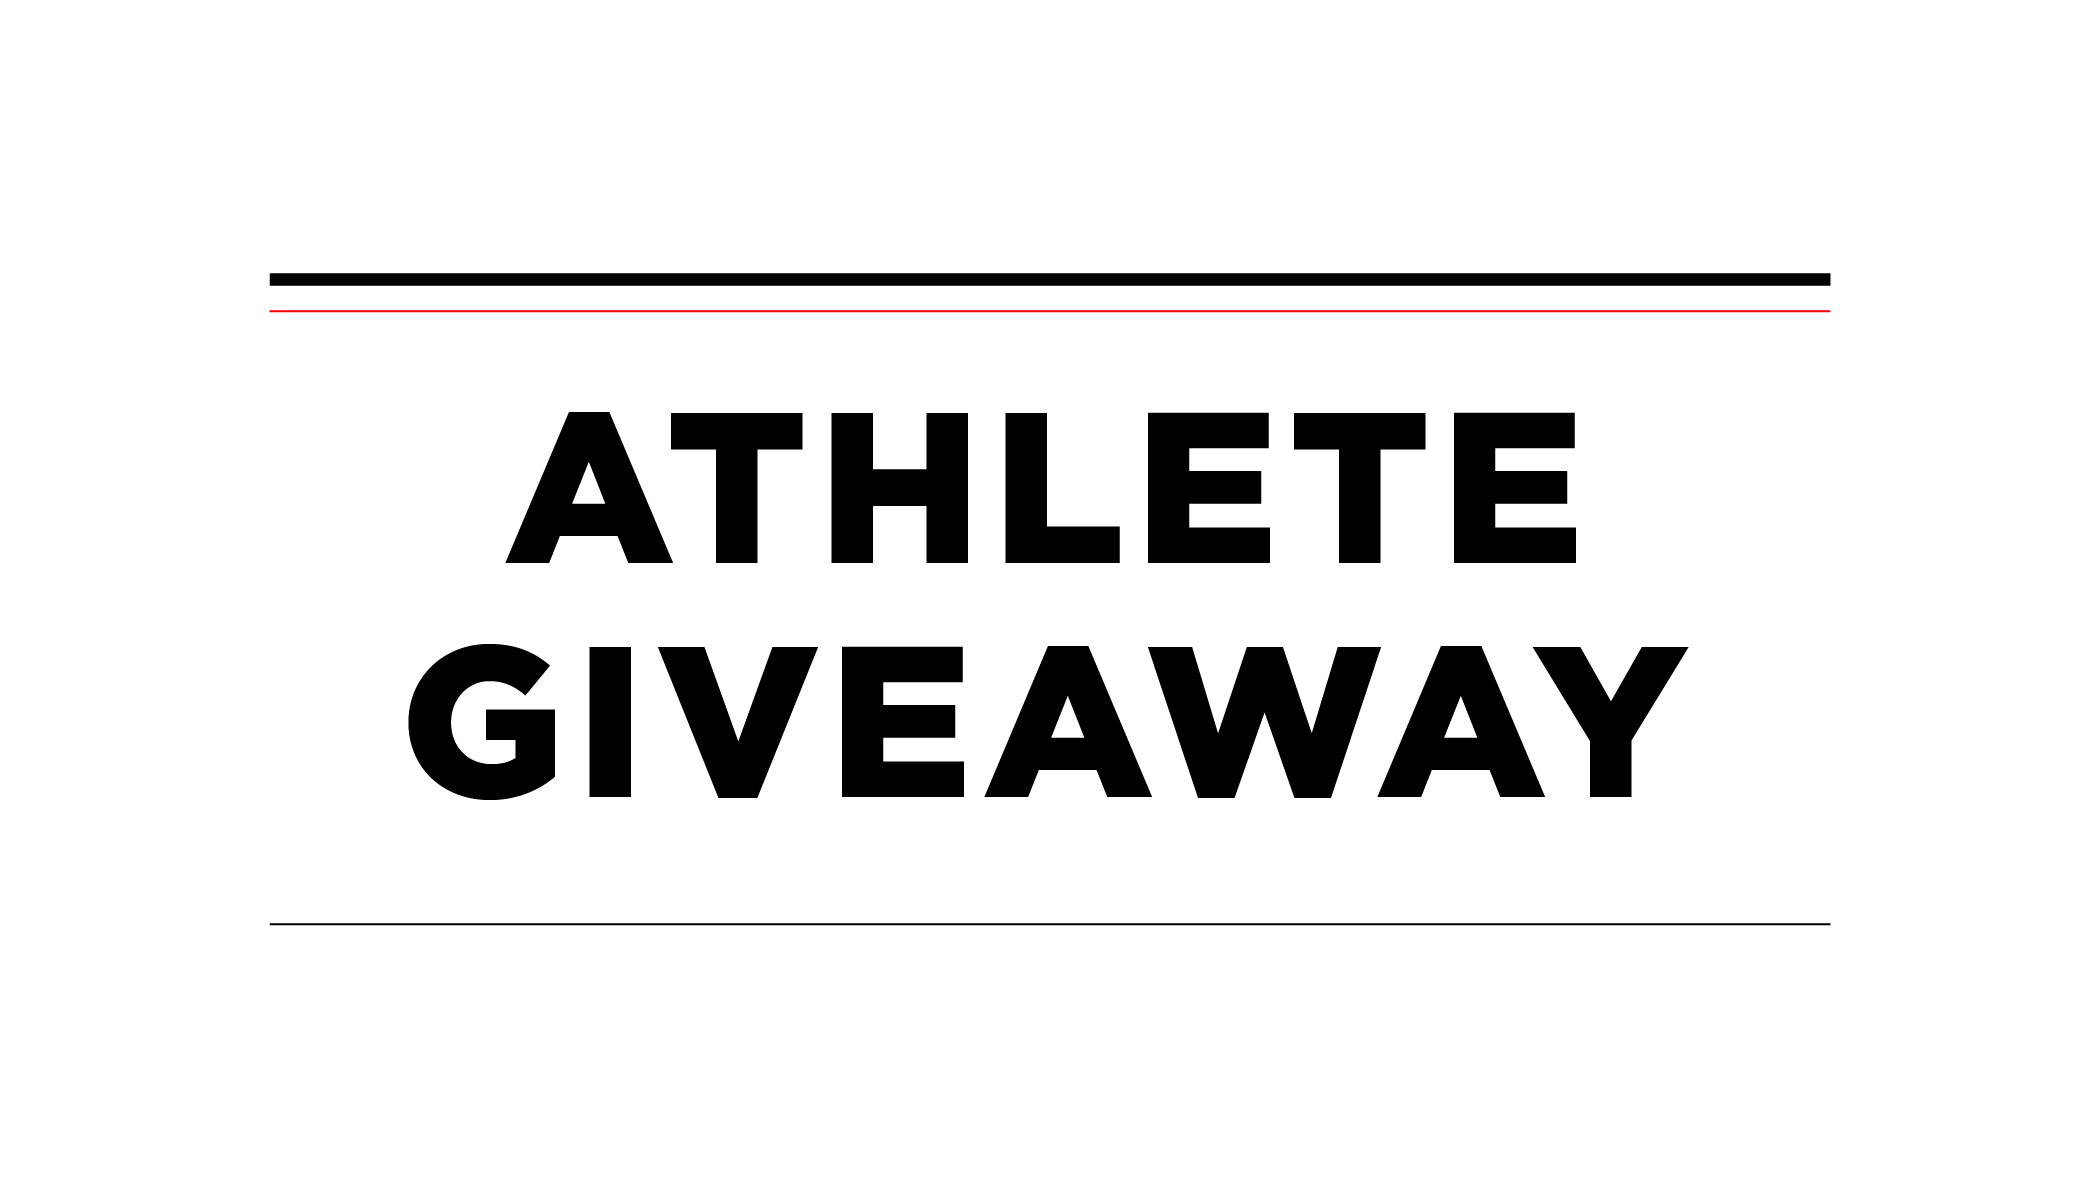 Athlete Giveaway #2